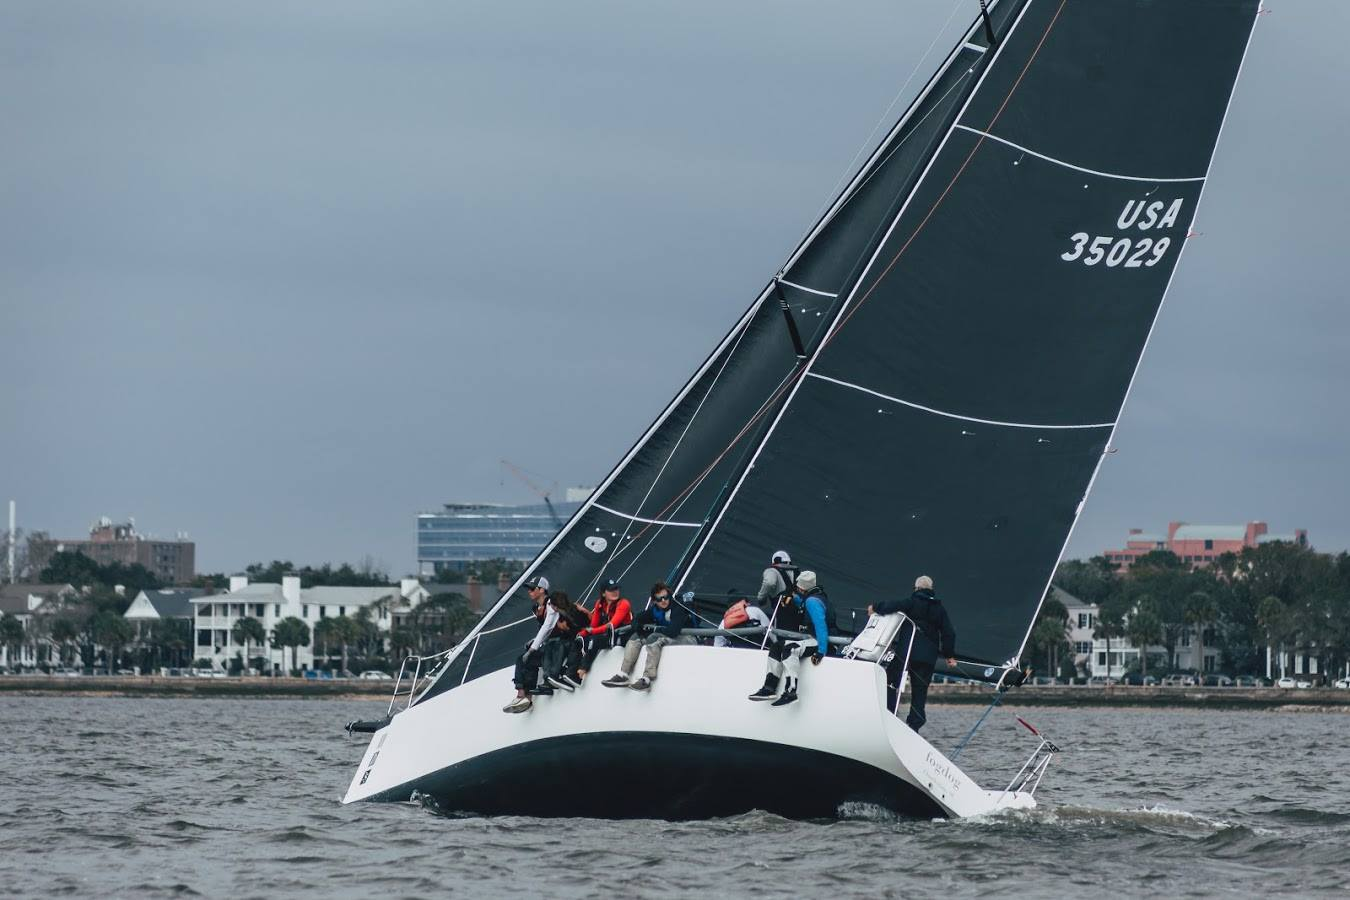 ADVANCING THE SPORT OF SAILING